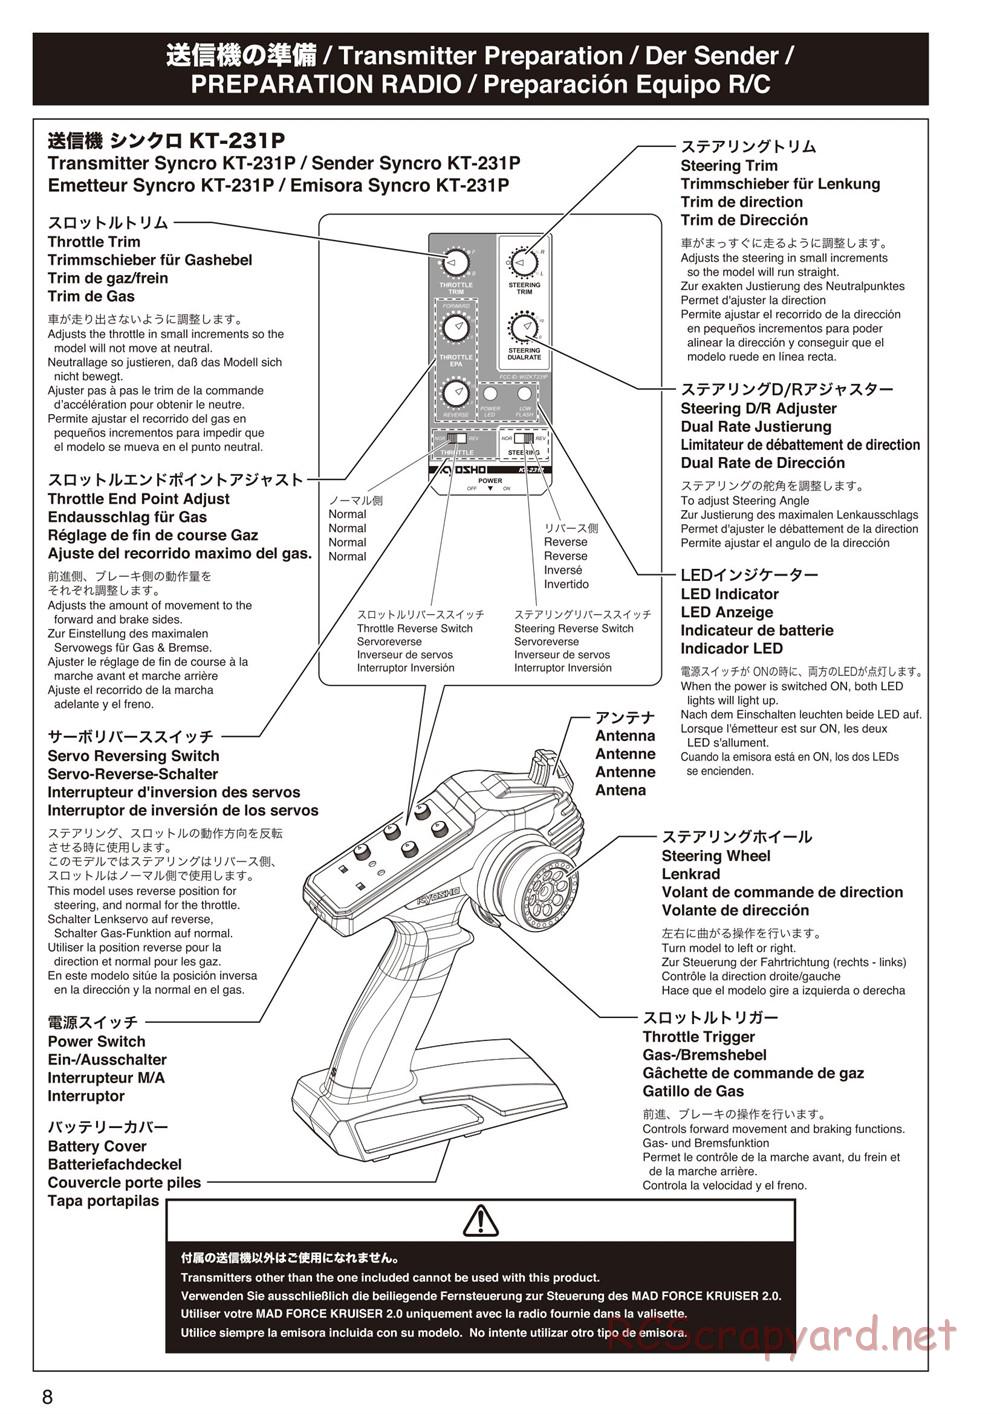 Kyosho - Mad Force Kruiser 2.0 - Manual - Page 8